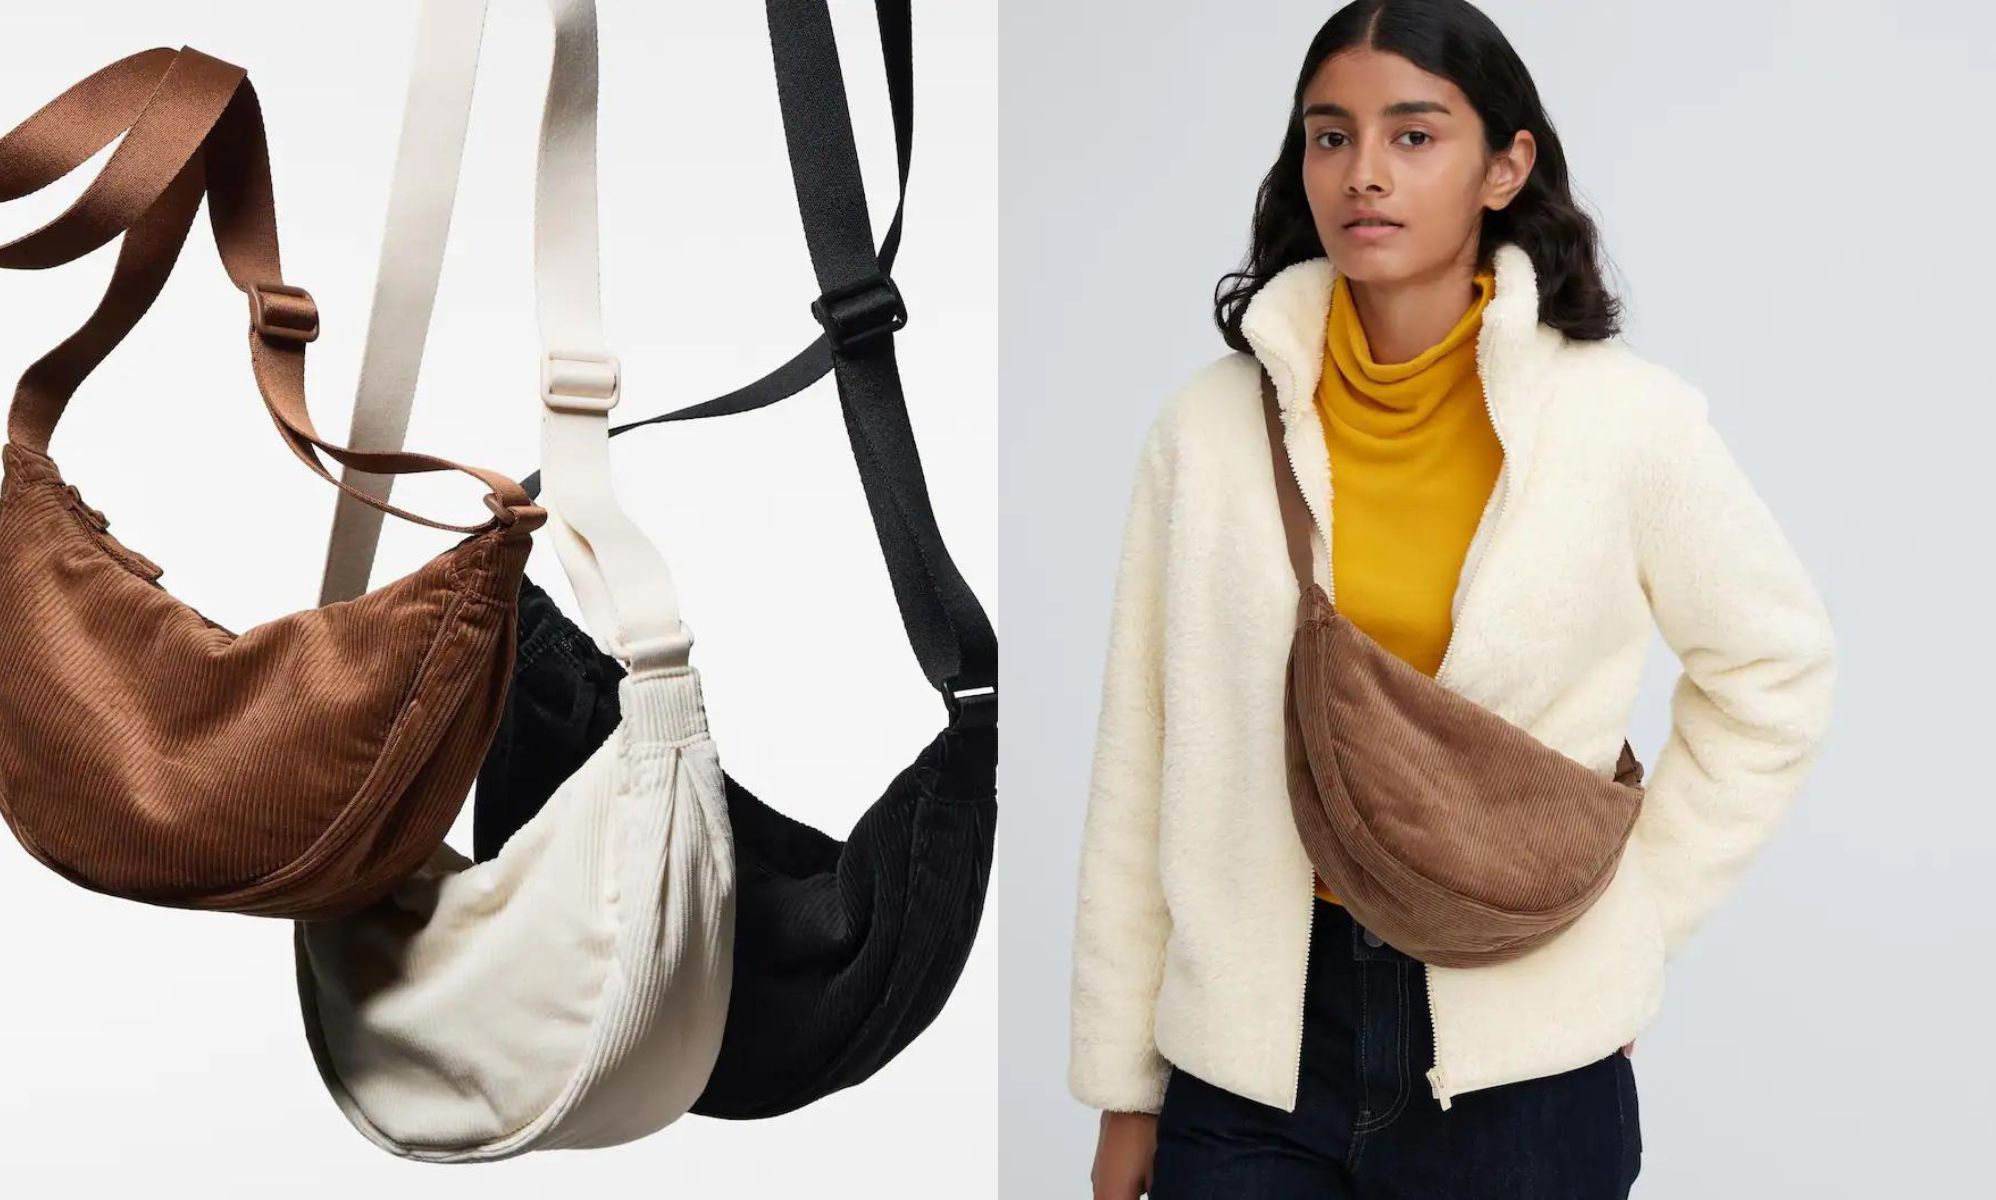 Everyone is buying this Uniqlo crossbody bag for the same reason